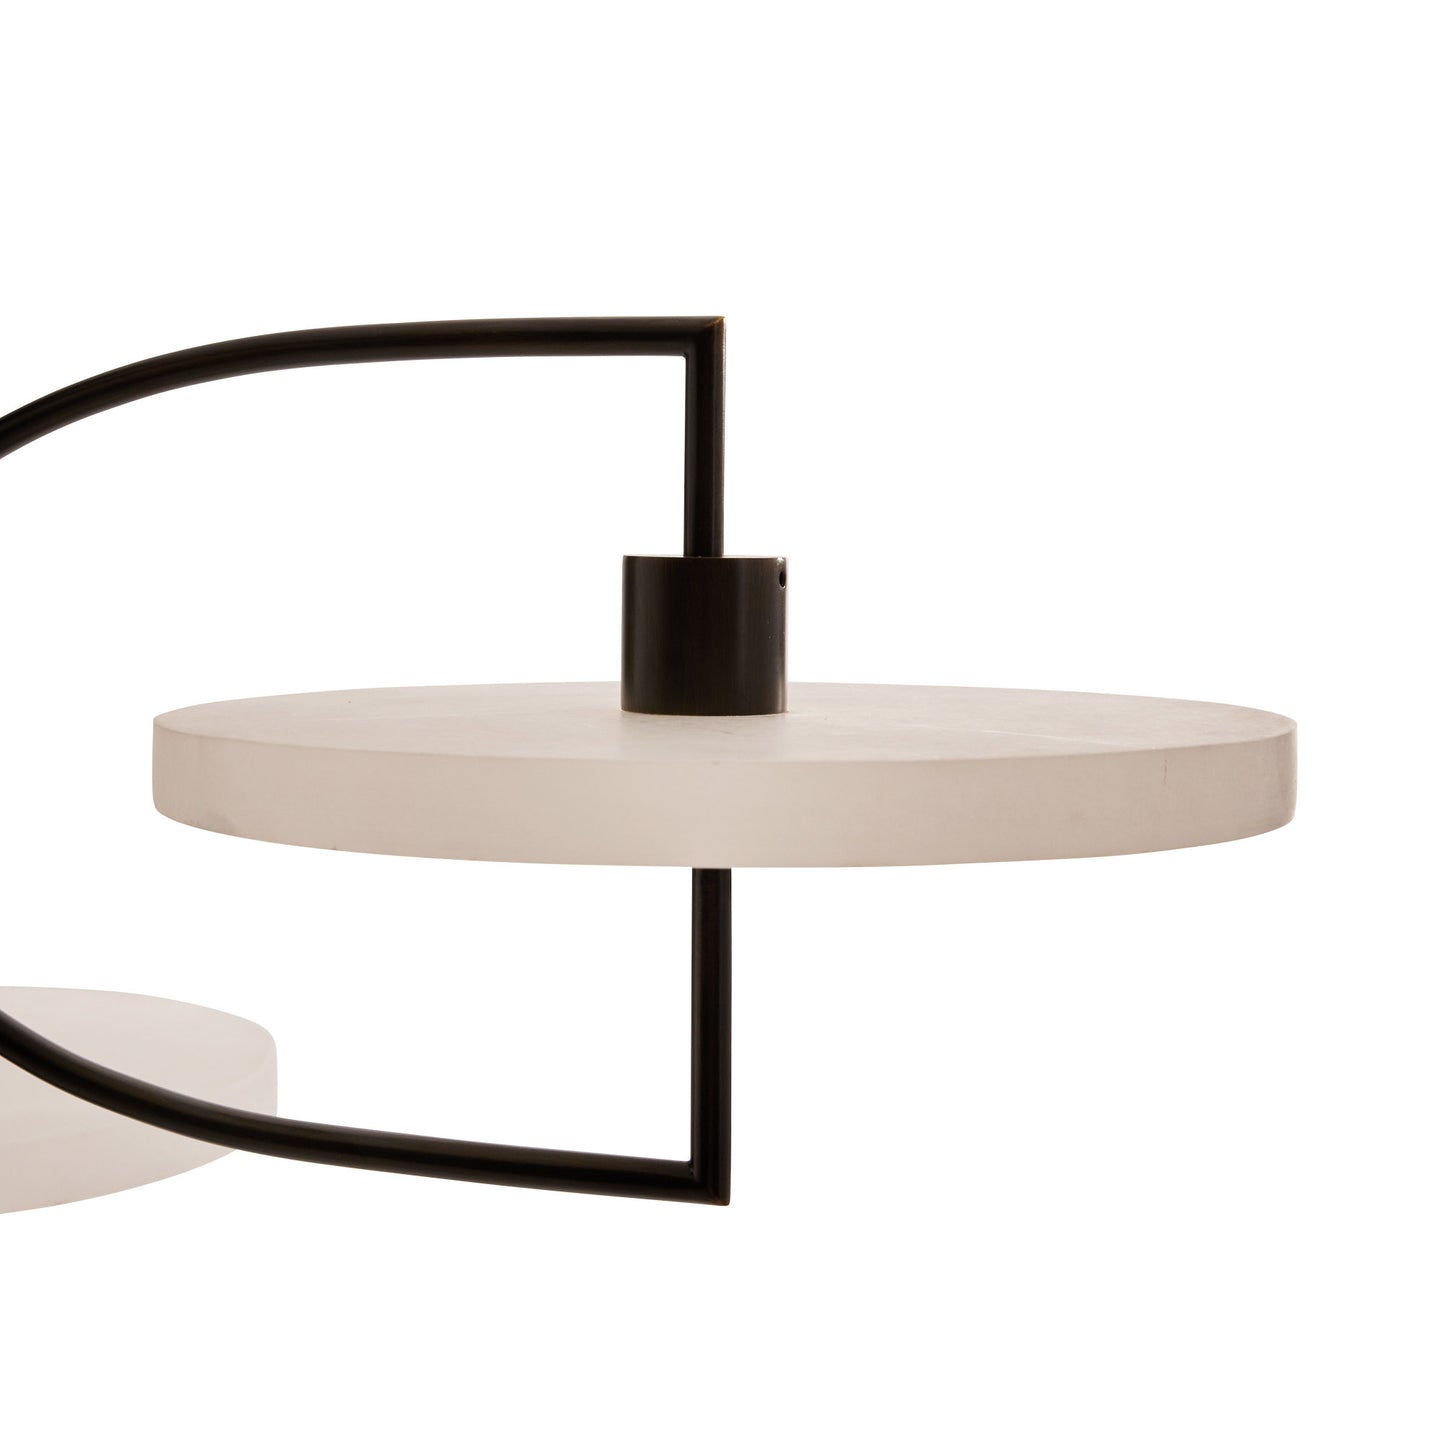 Moshi Floor Lamp - Bronze with White Alabaster - Modern Illumination for Your Space